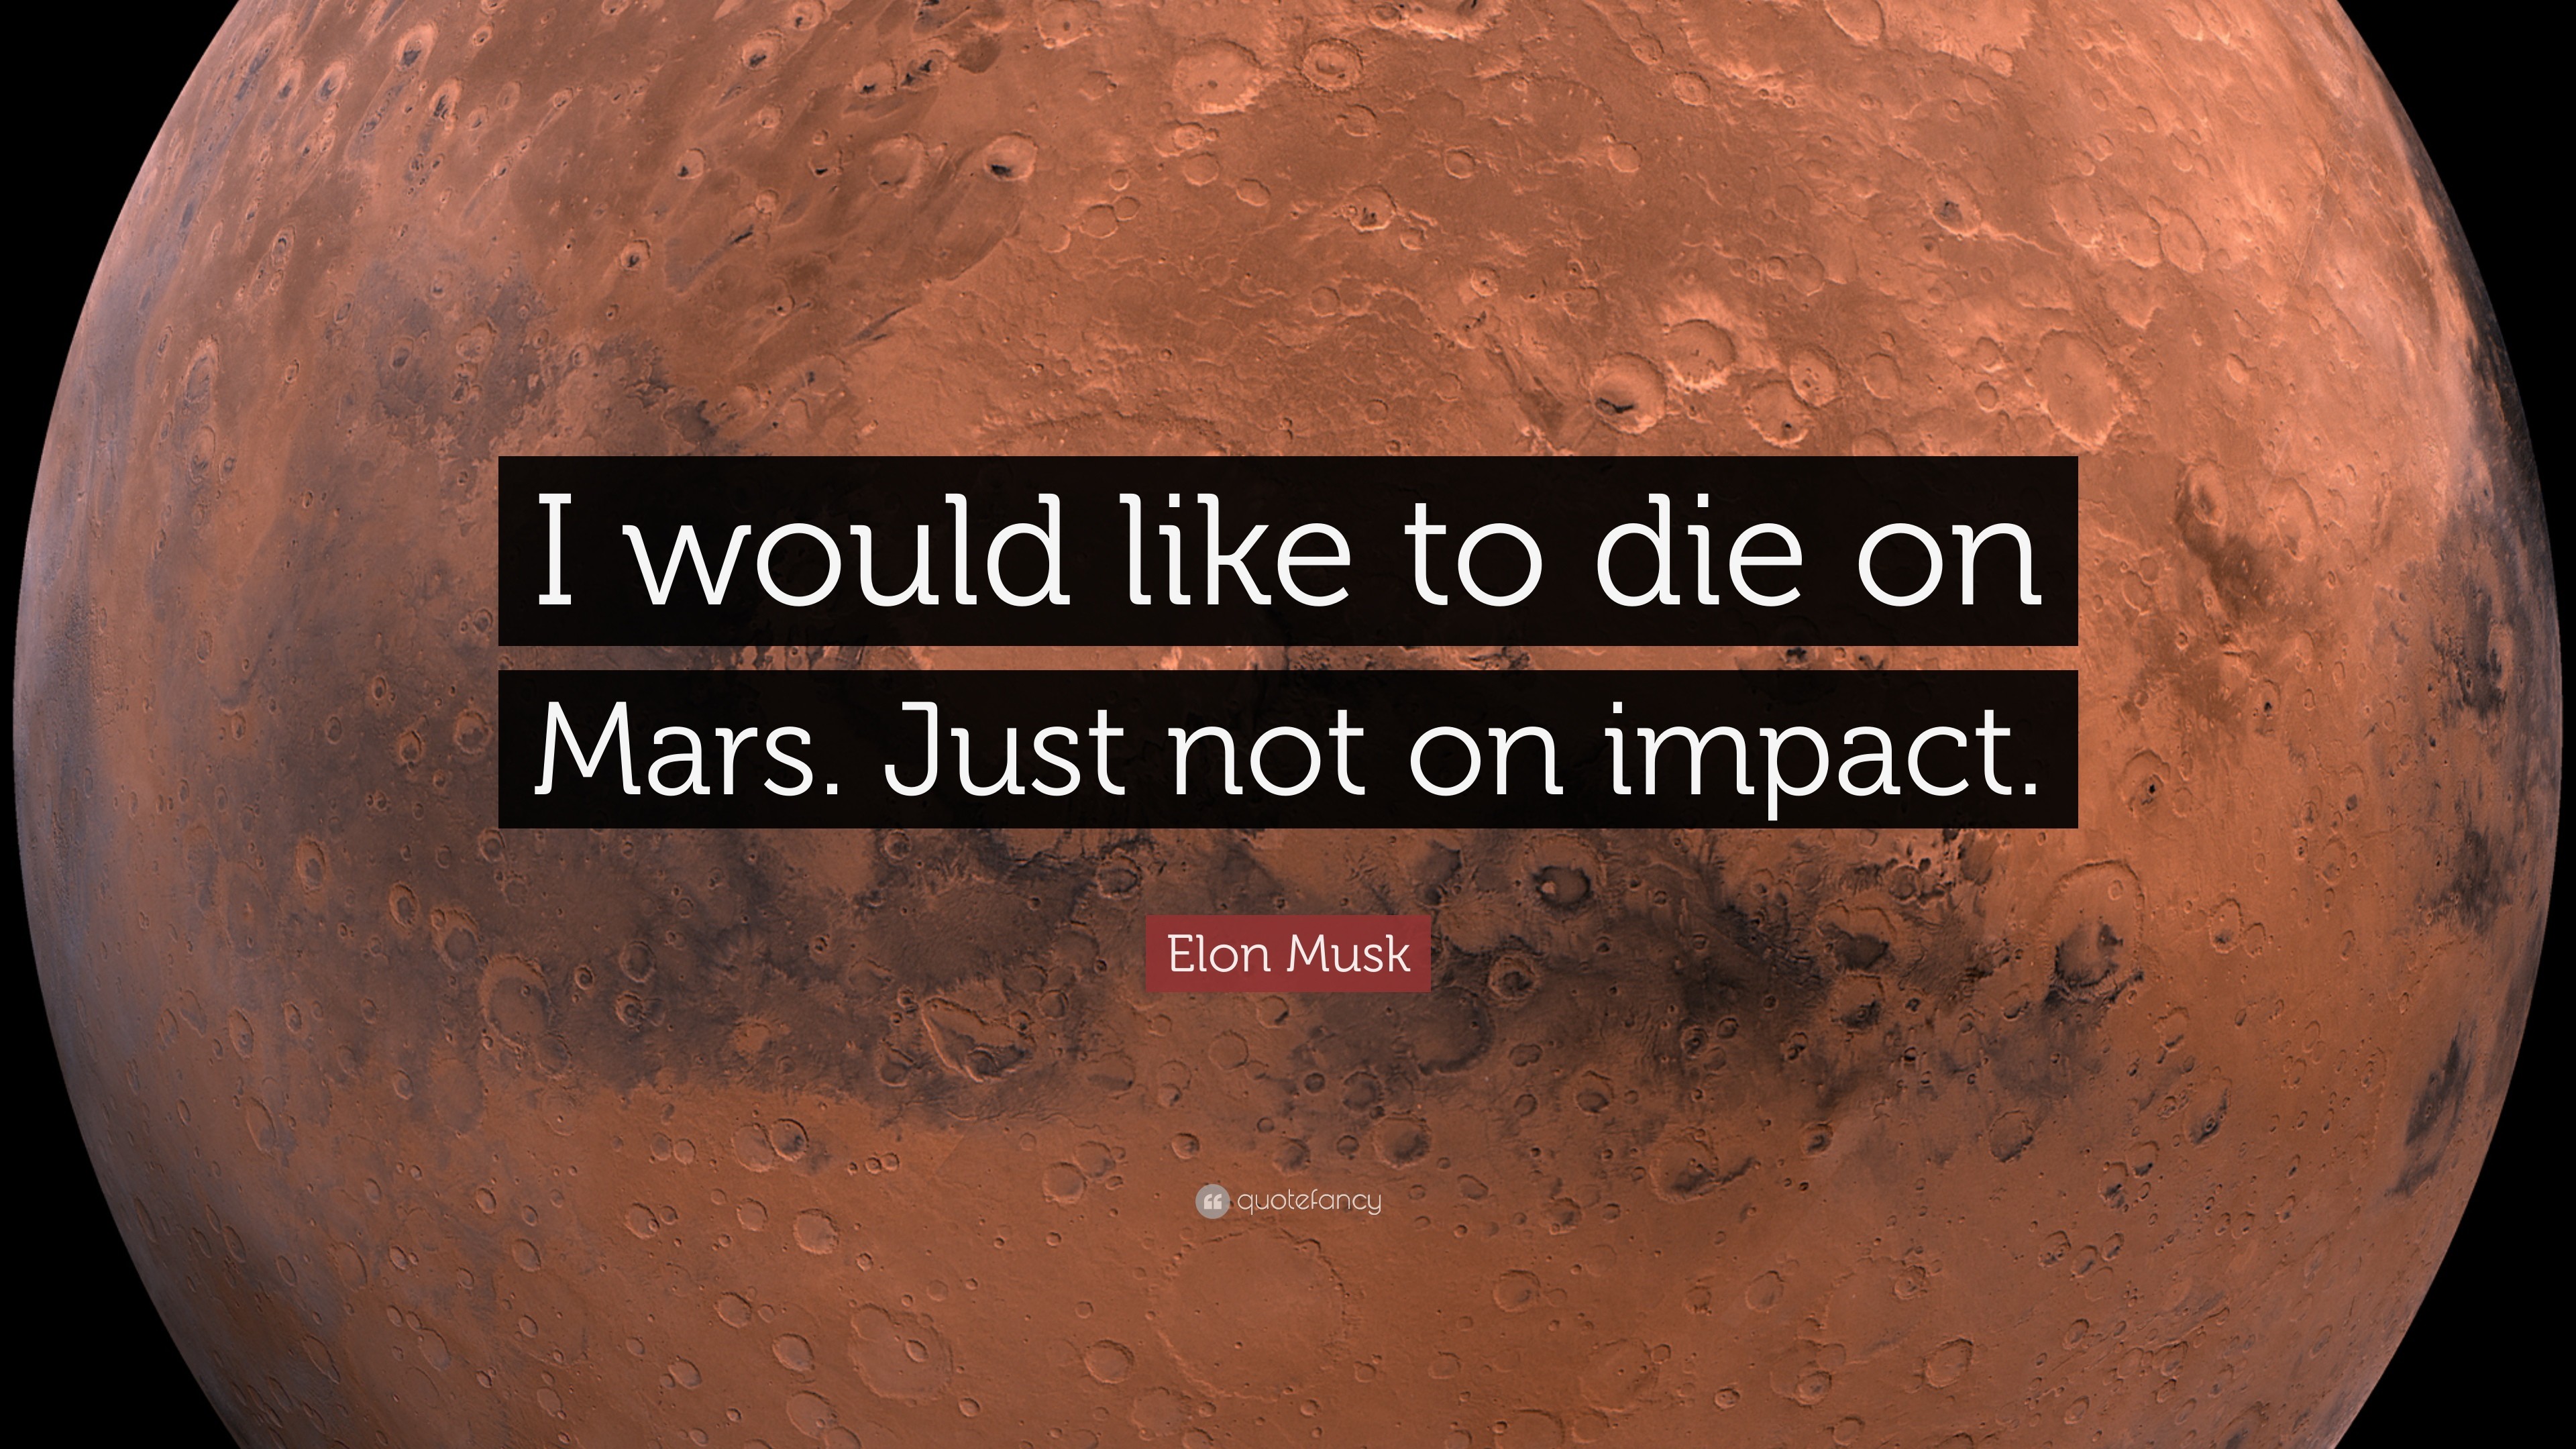 3840x2160 Elon Musk Quote: “I would like to die on Mars. Just not on